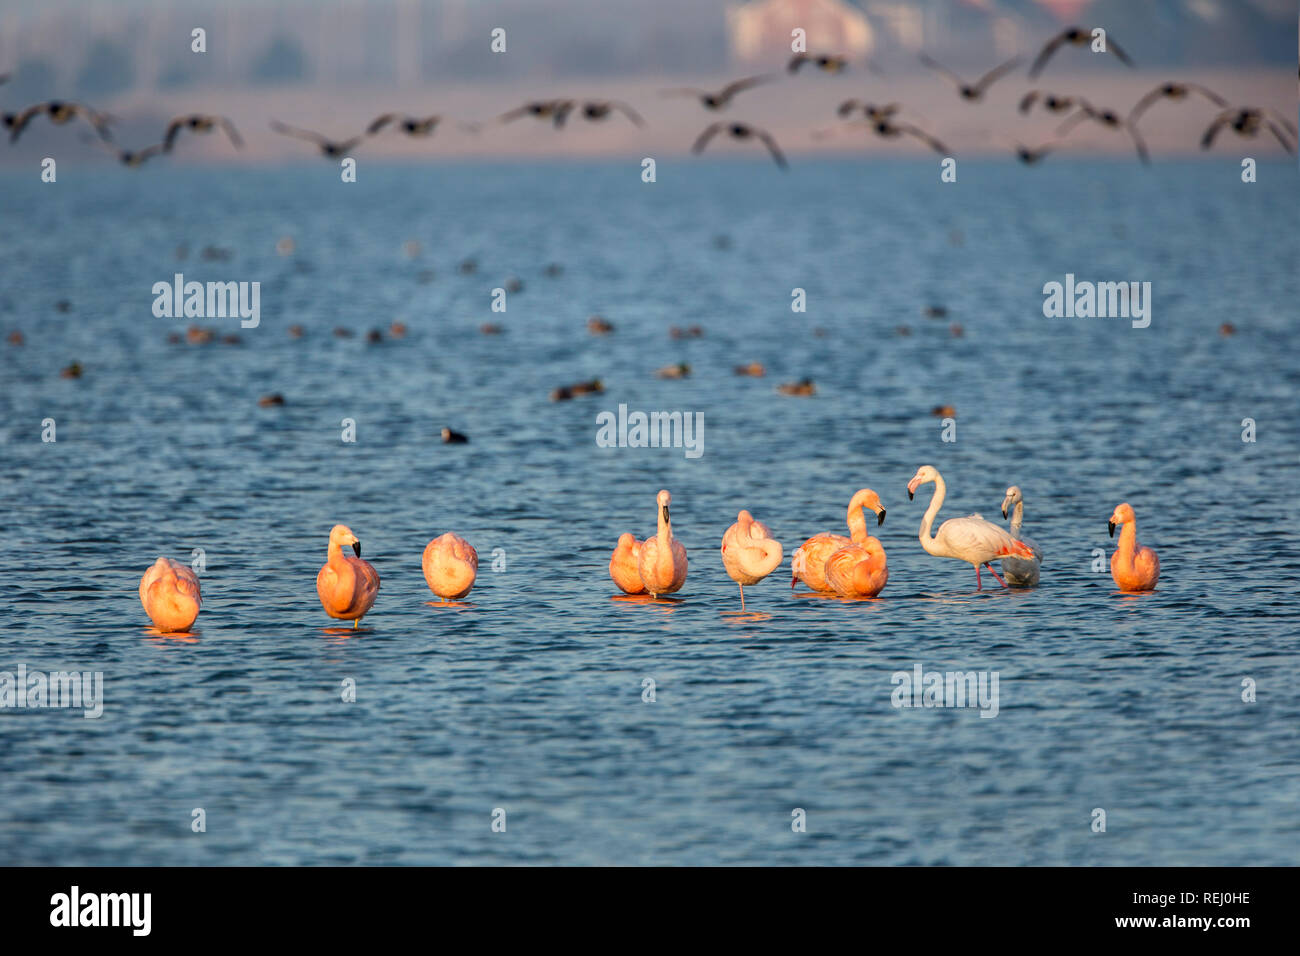 The Netherlands, Battenoord, hamlet on the island Goeree-Overflakkee, lake called Grevelingenmeer. Wintering place for flamingos. Barnacle geese. Stock Photo